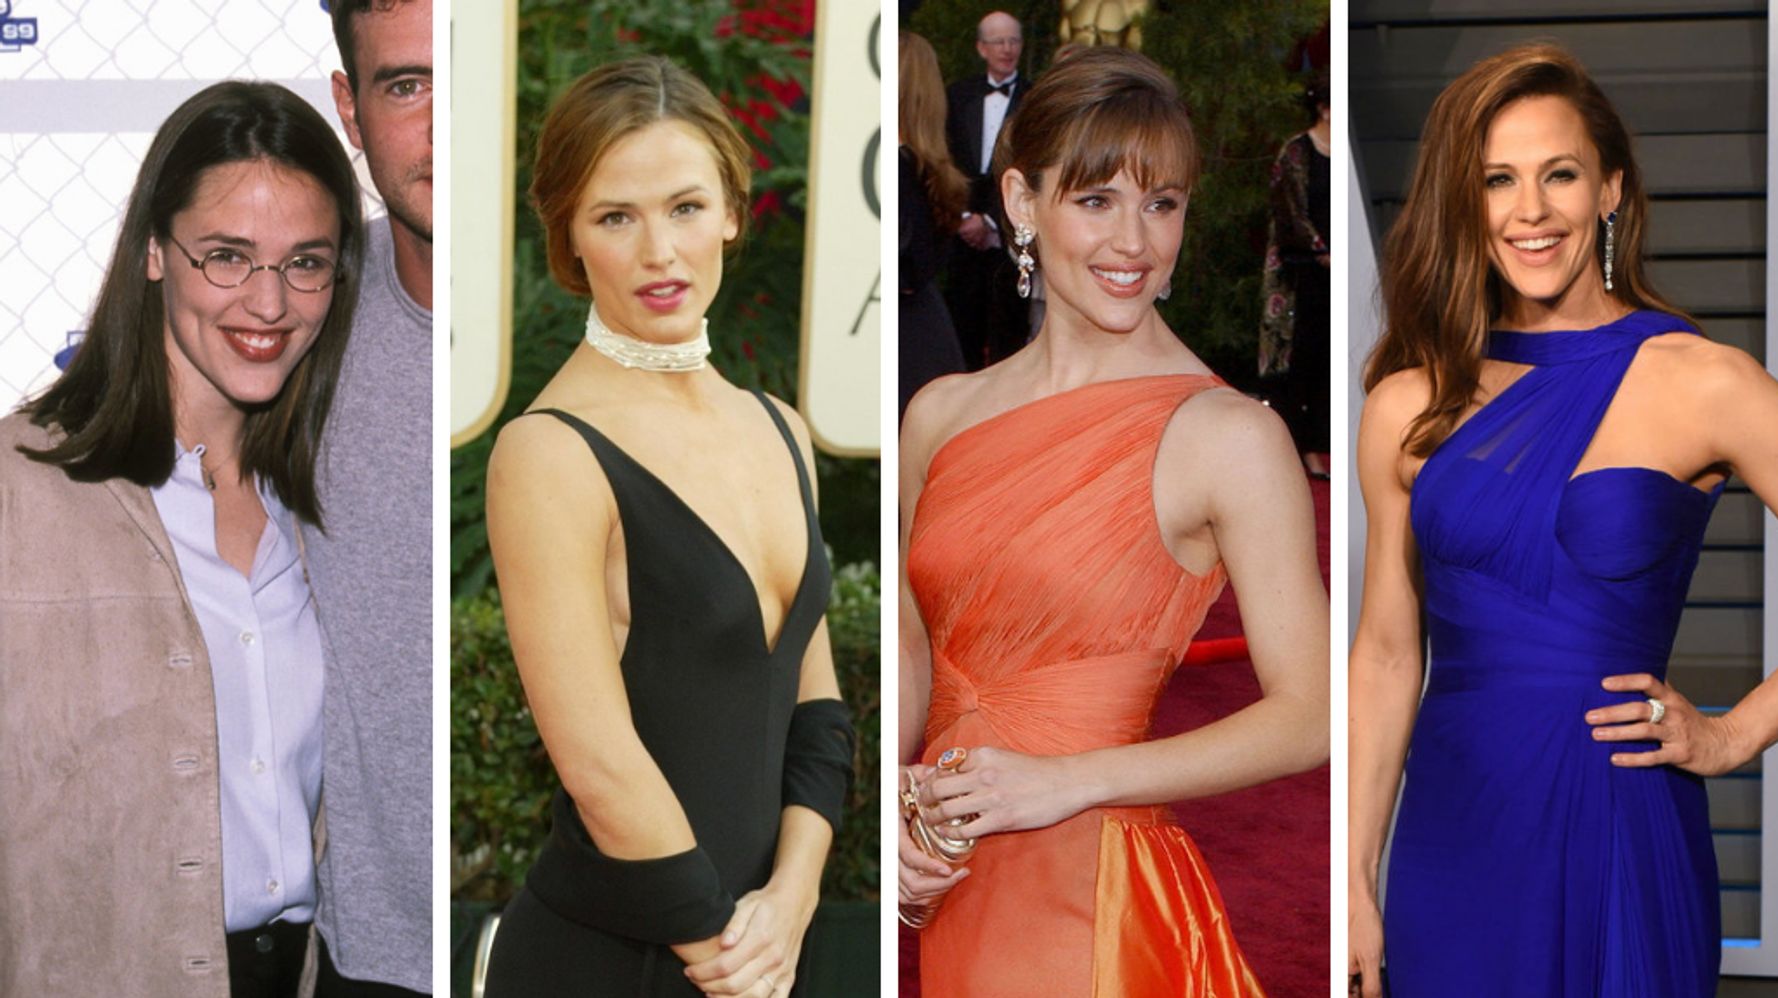 Must-See Photos Of Jennifer Garner's Style | HuffPost Life